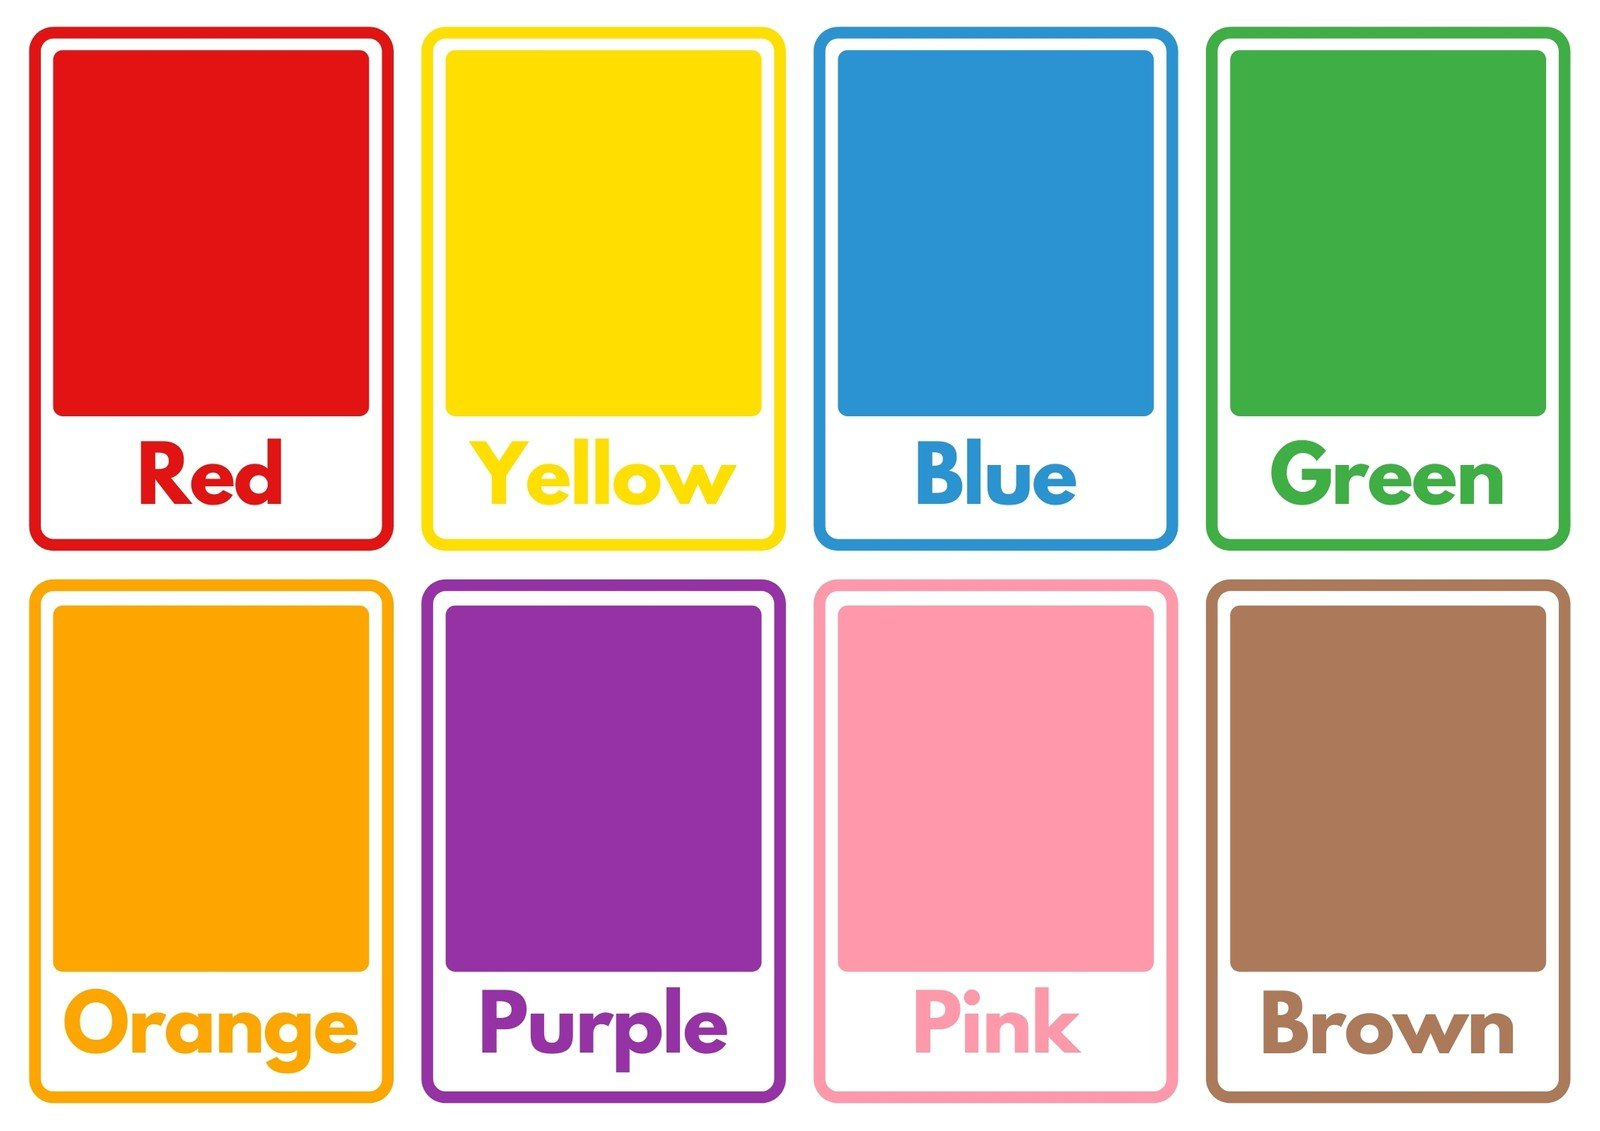 Free Color Flashcard Templates To Edit And Print | Canva intended for Color Flashcards Printable Free